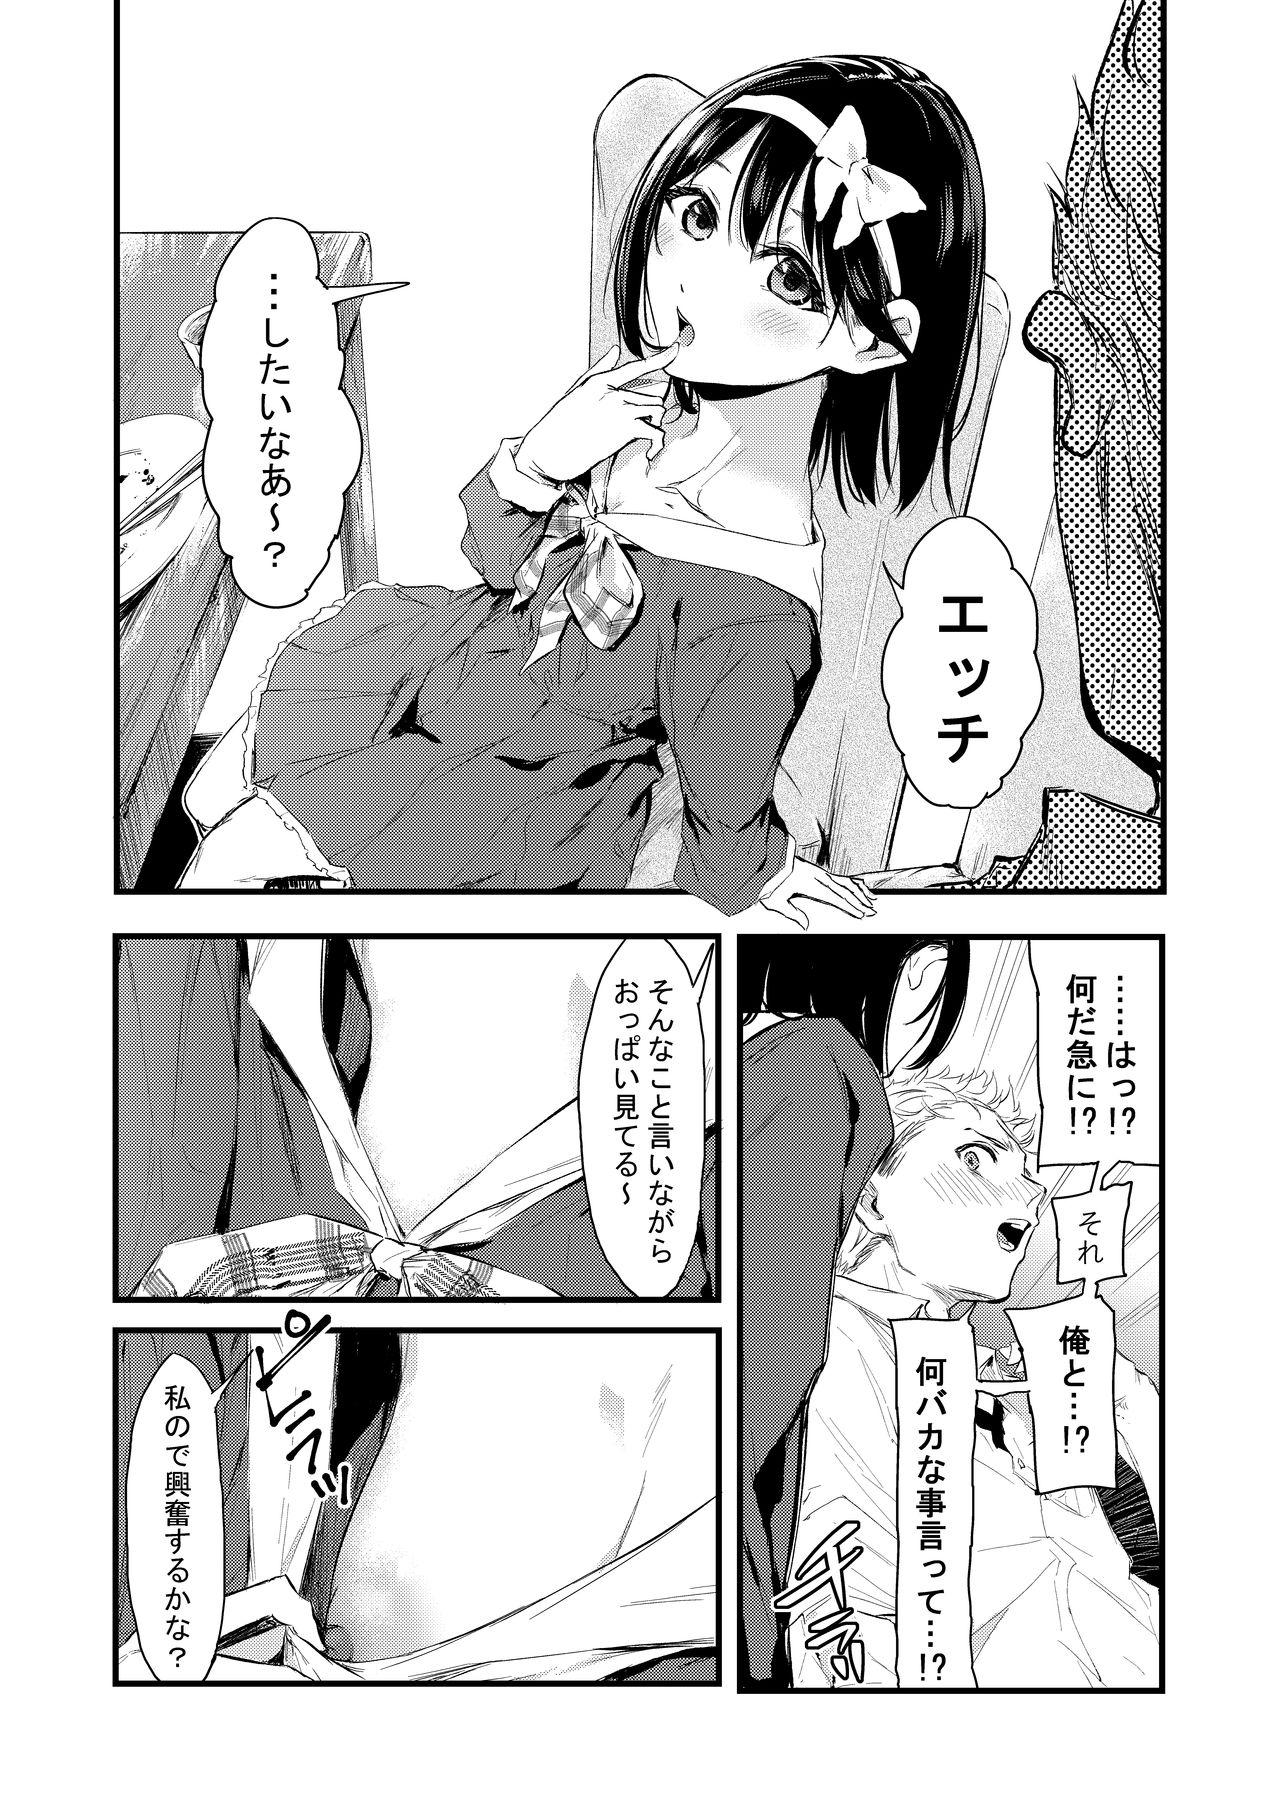 Amante 気づいたら兄のが挿入ってた Toilet - Page 10